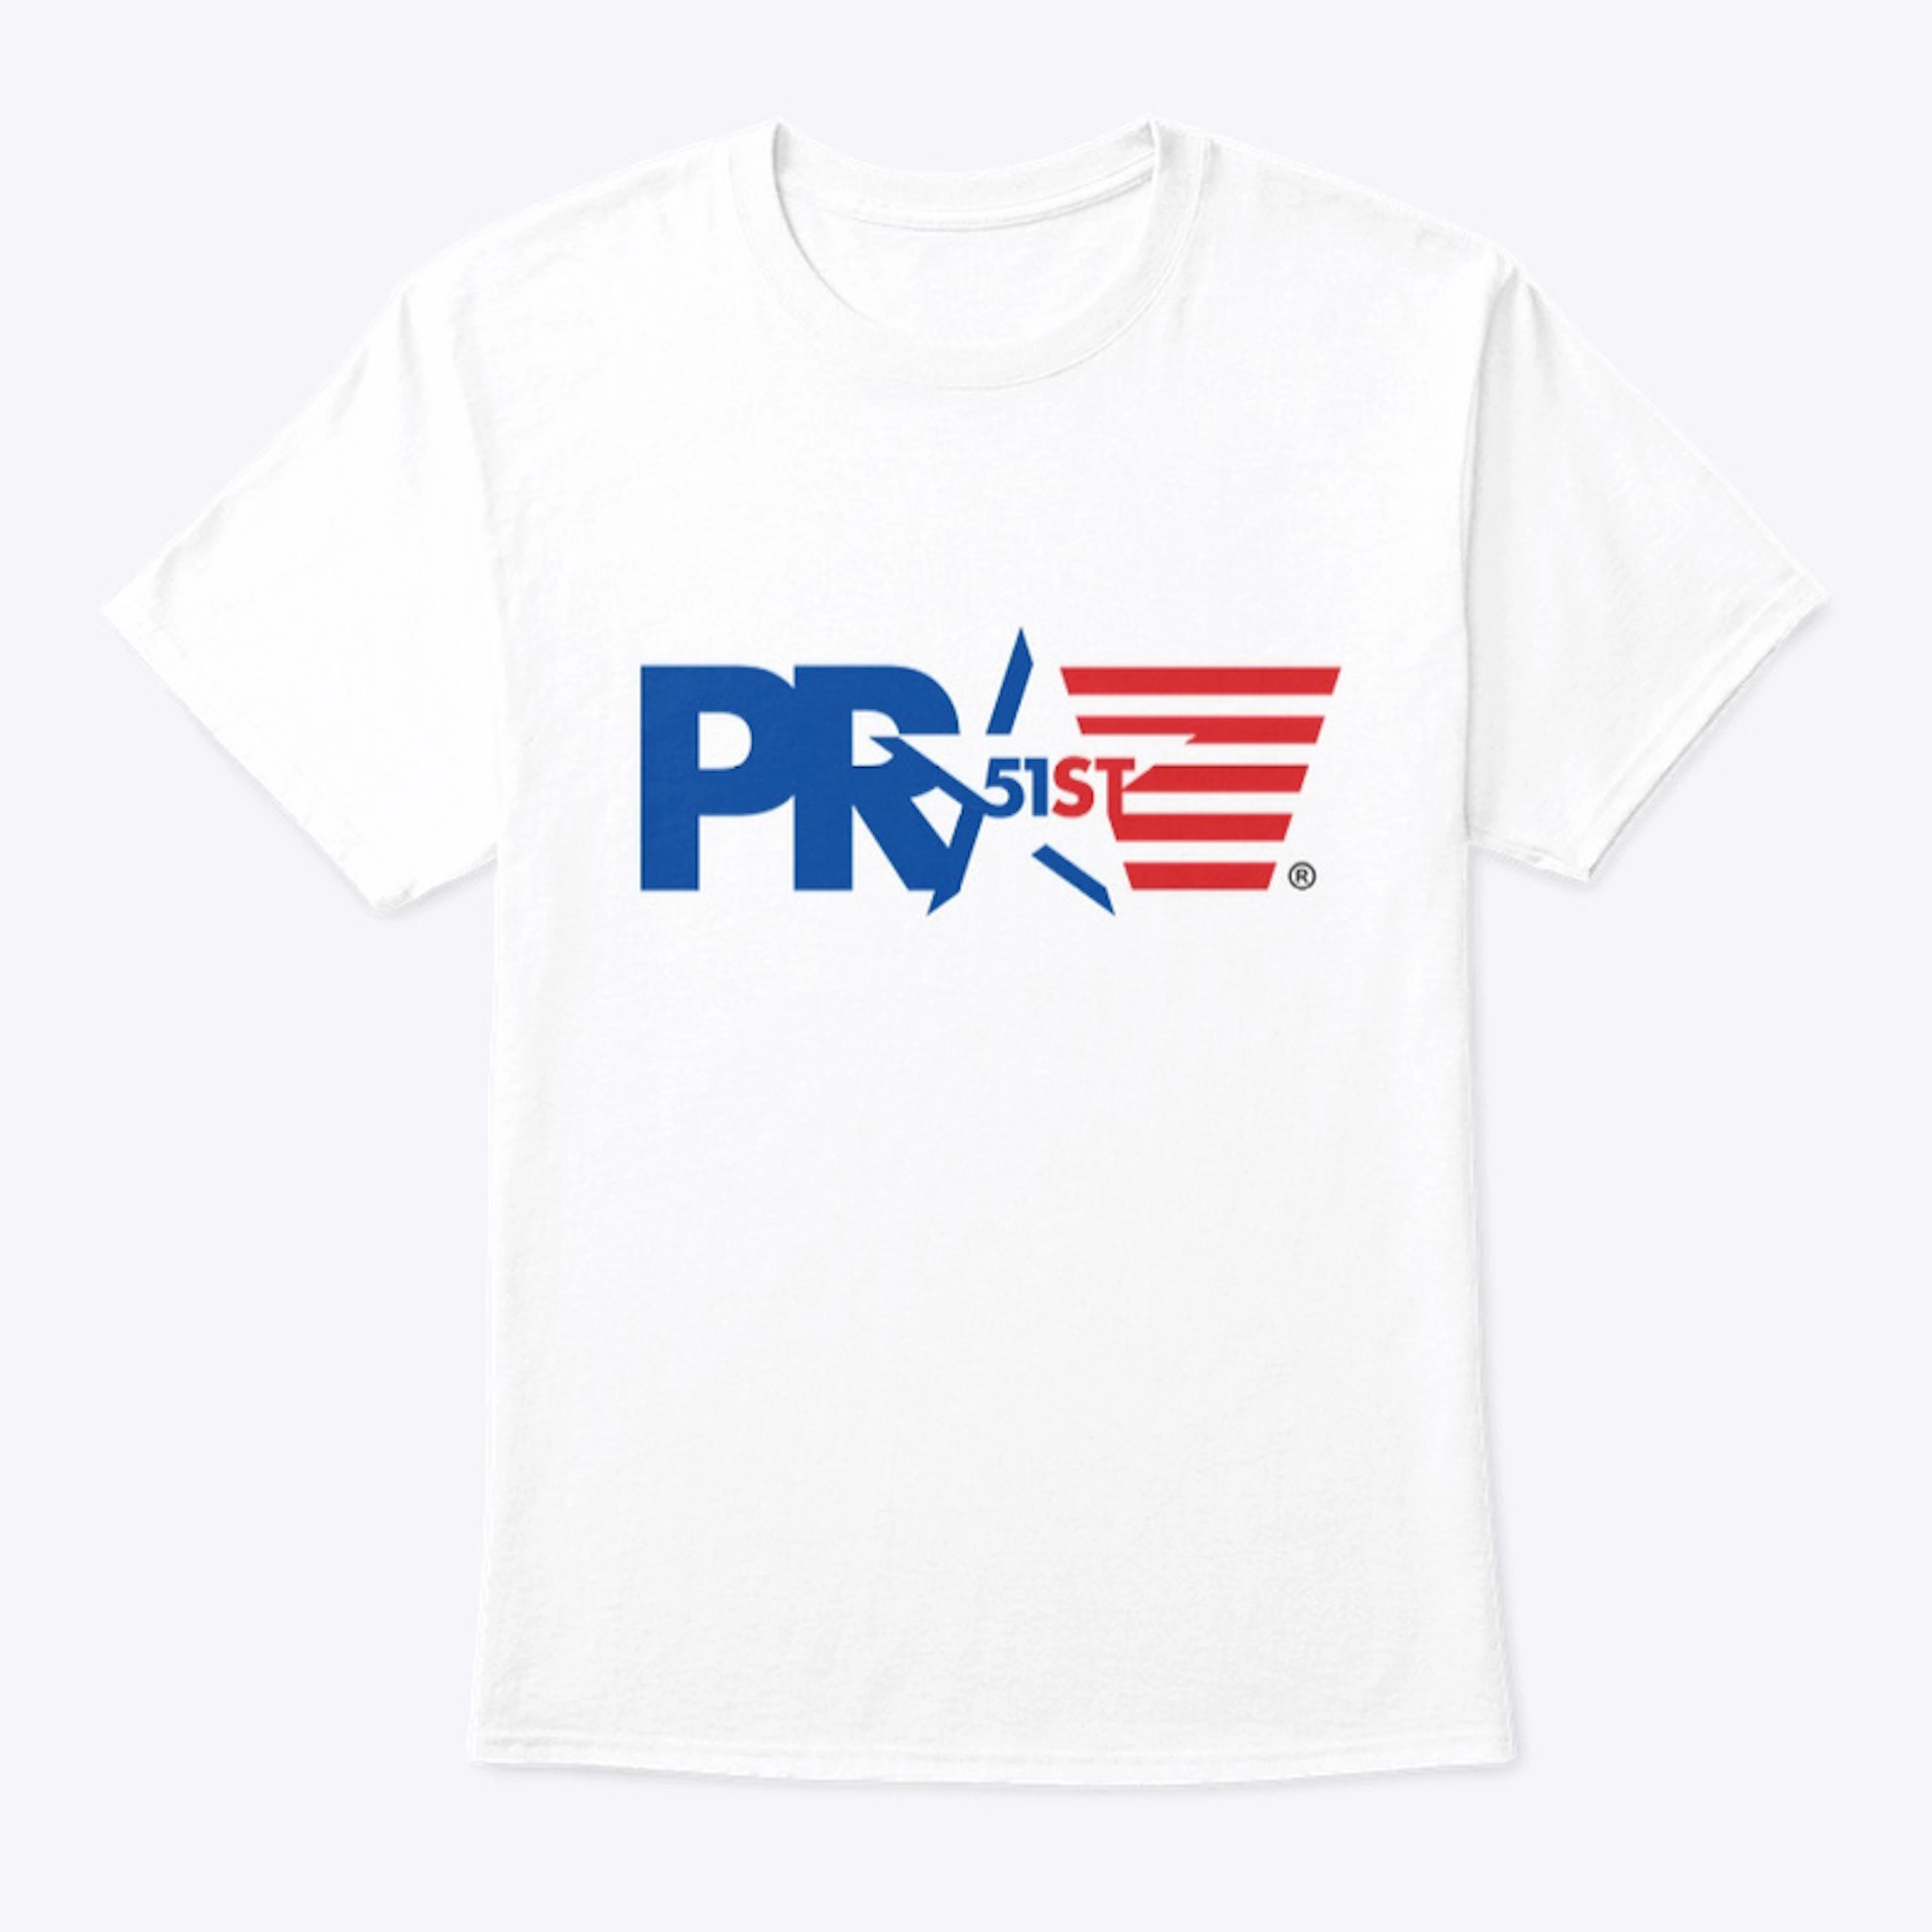 PR51ST Red, White, and Blue Collection